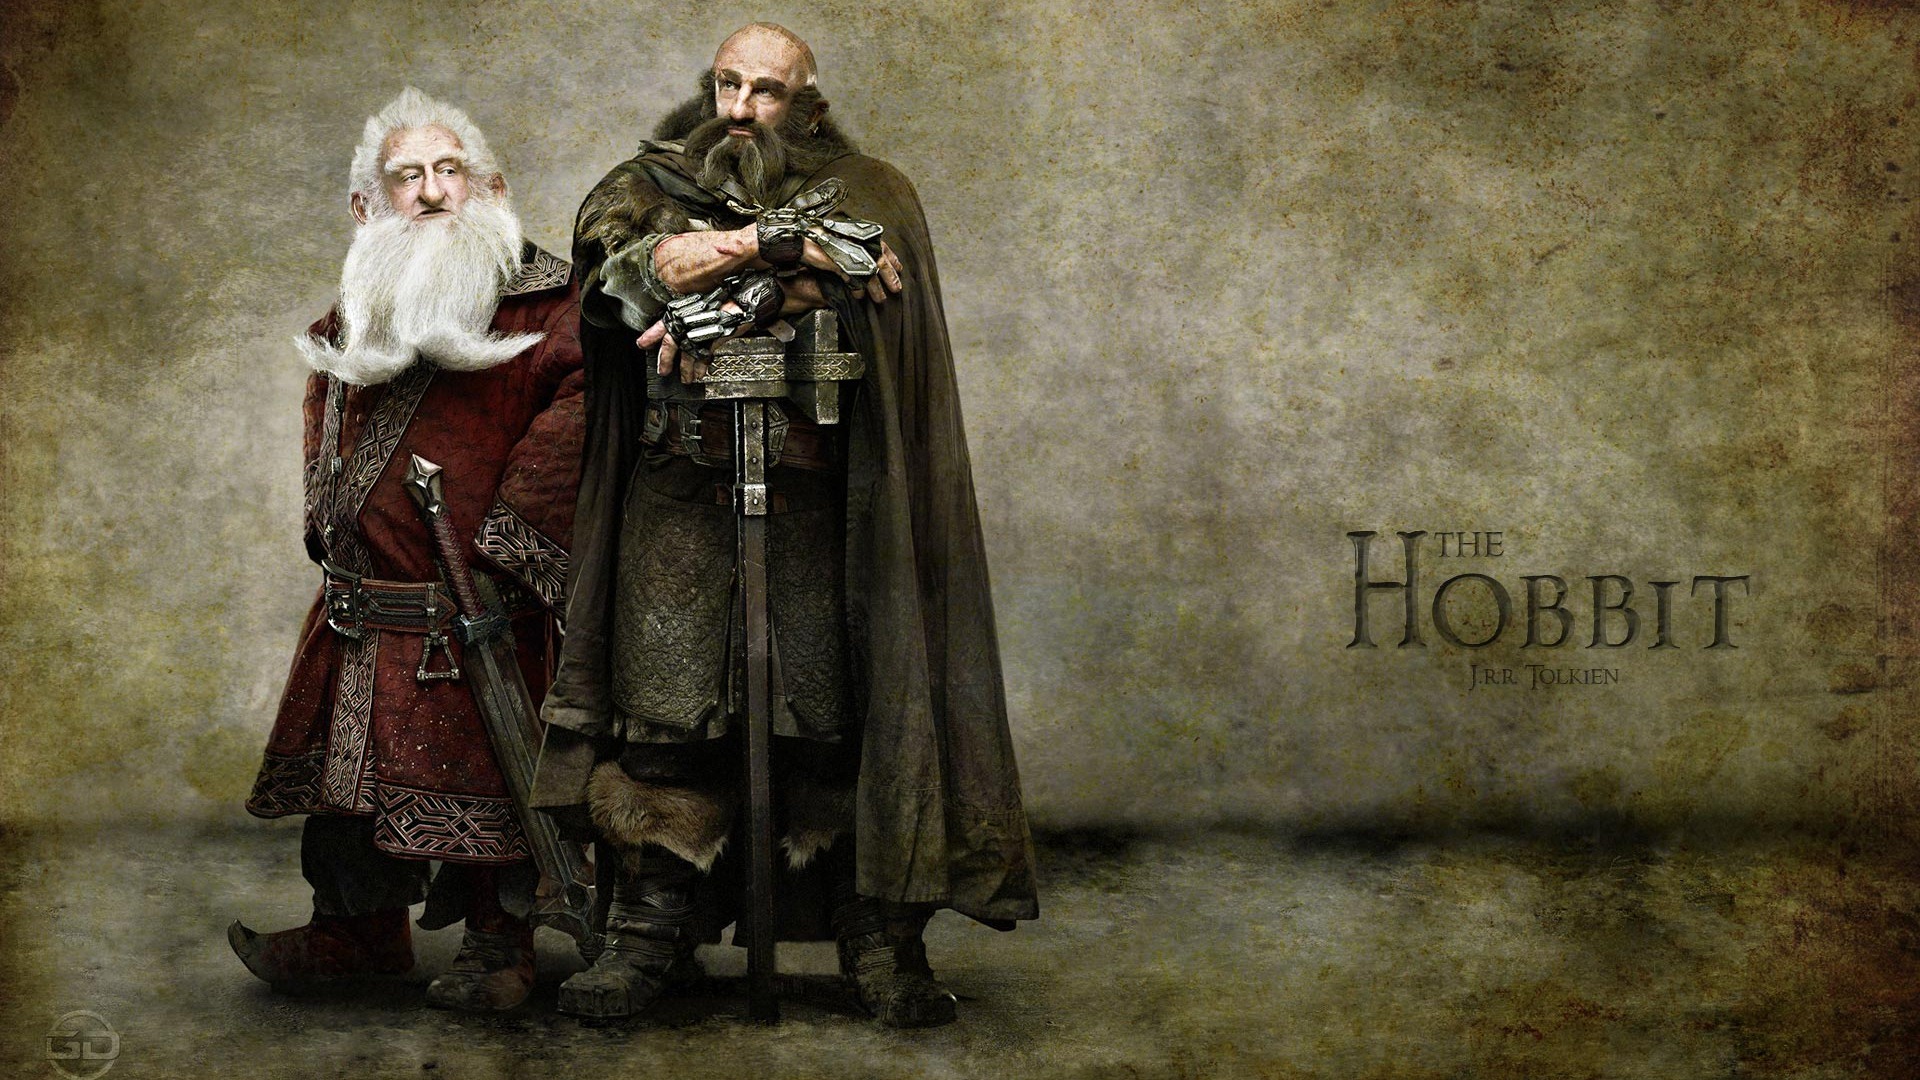 The Hobbit: An Unexpected Journey HD wallpapers #4 - 1920x1080